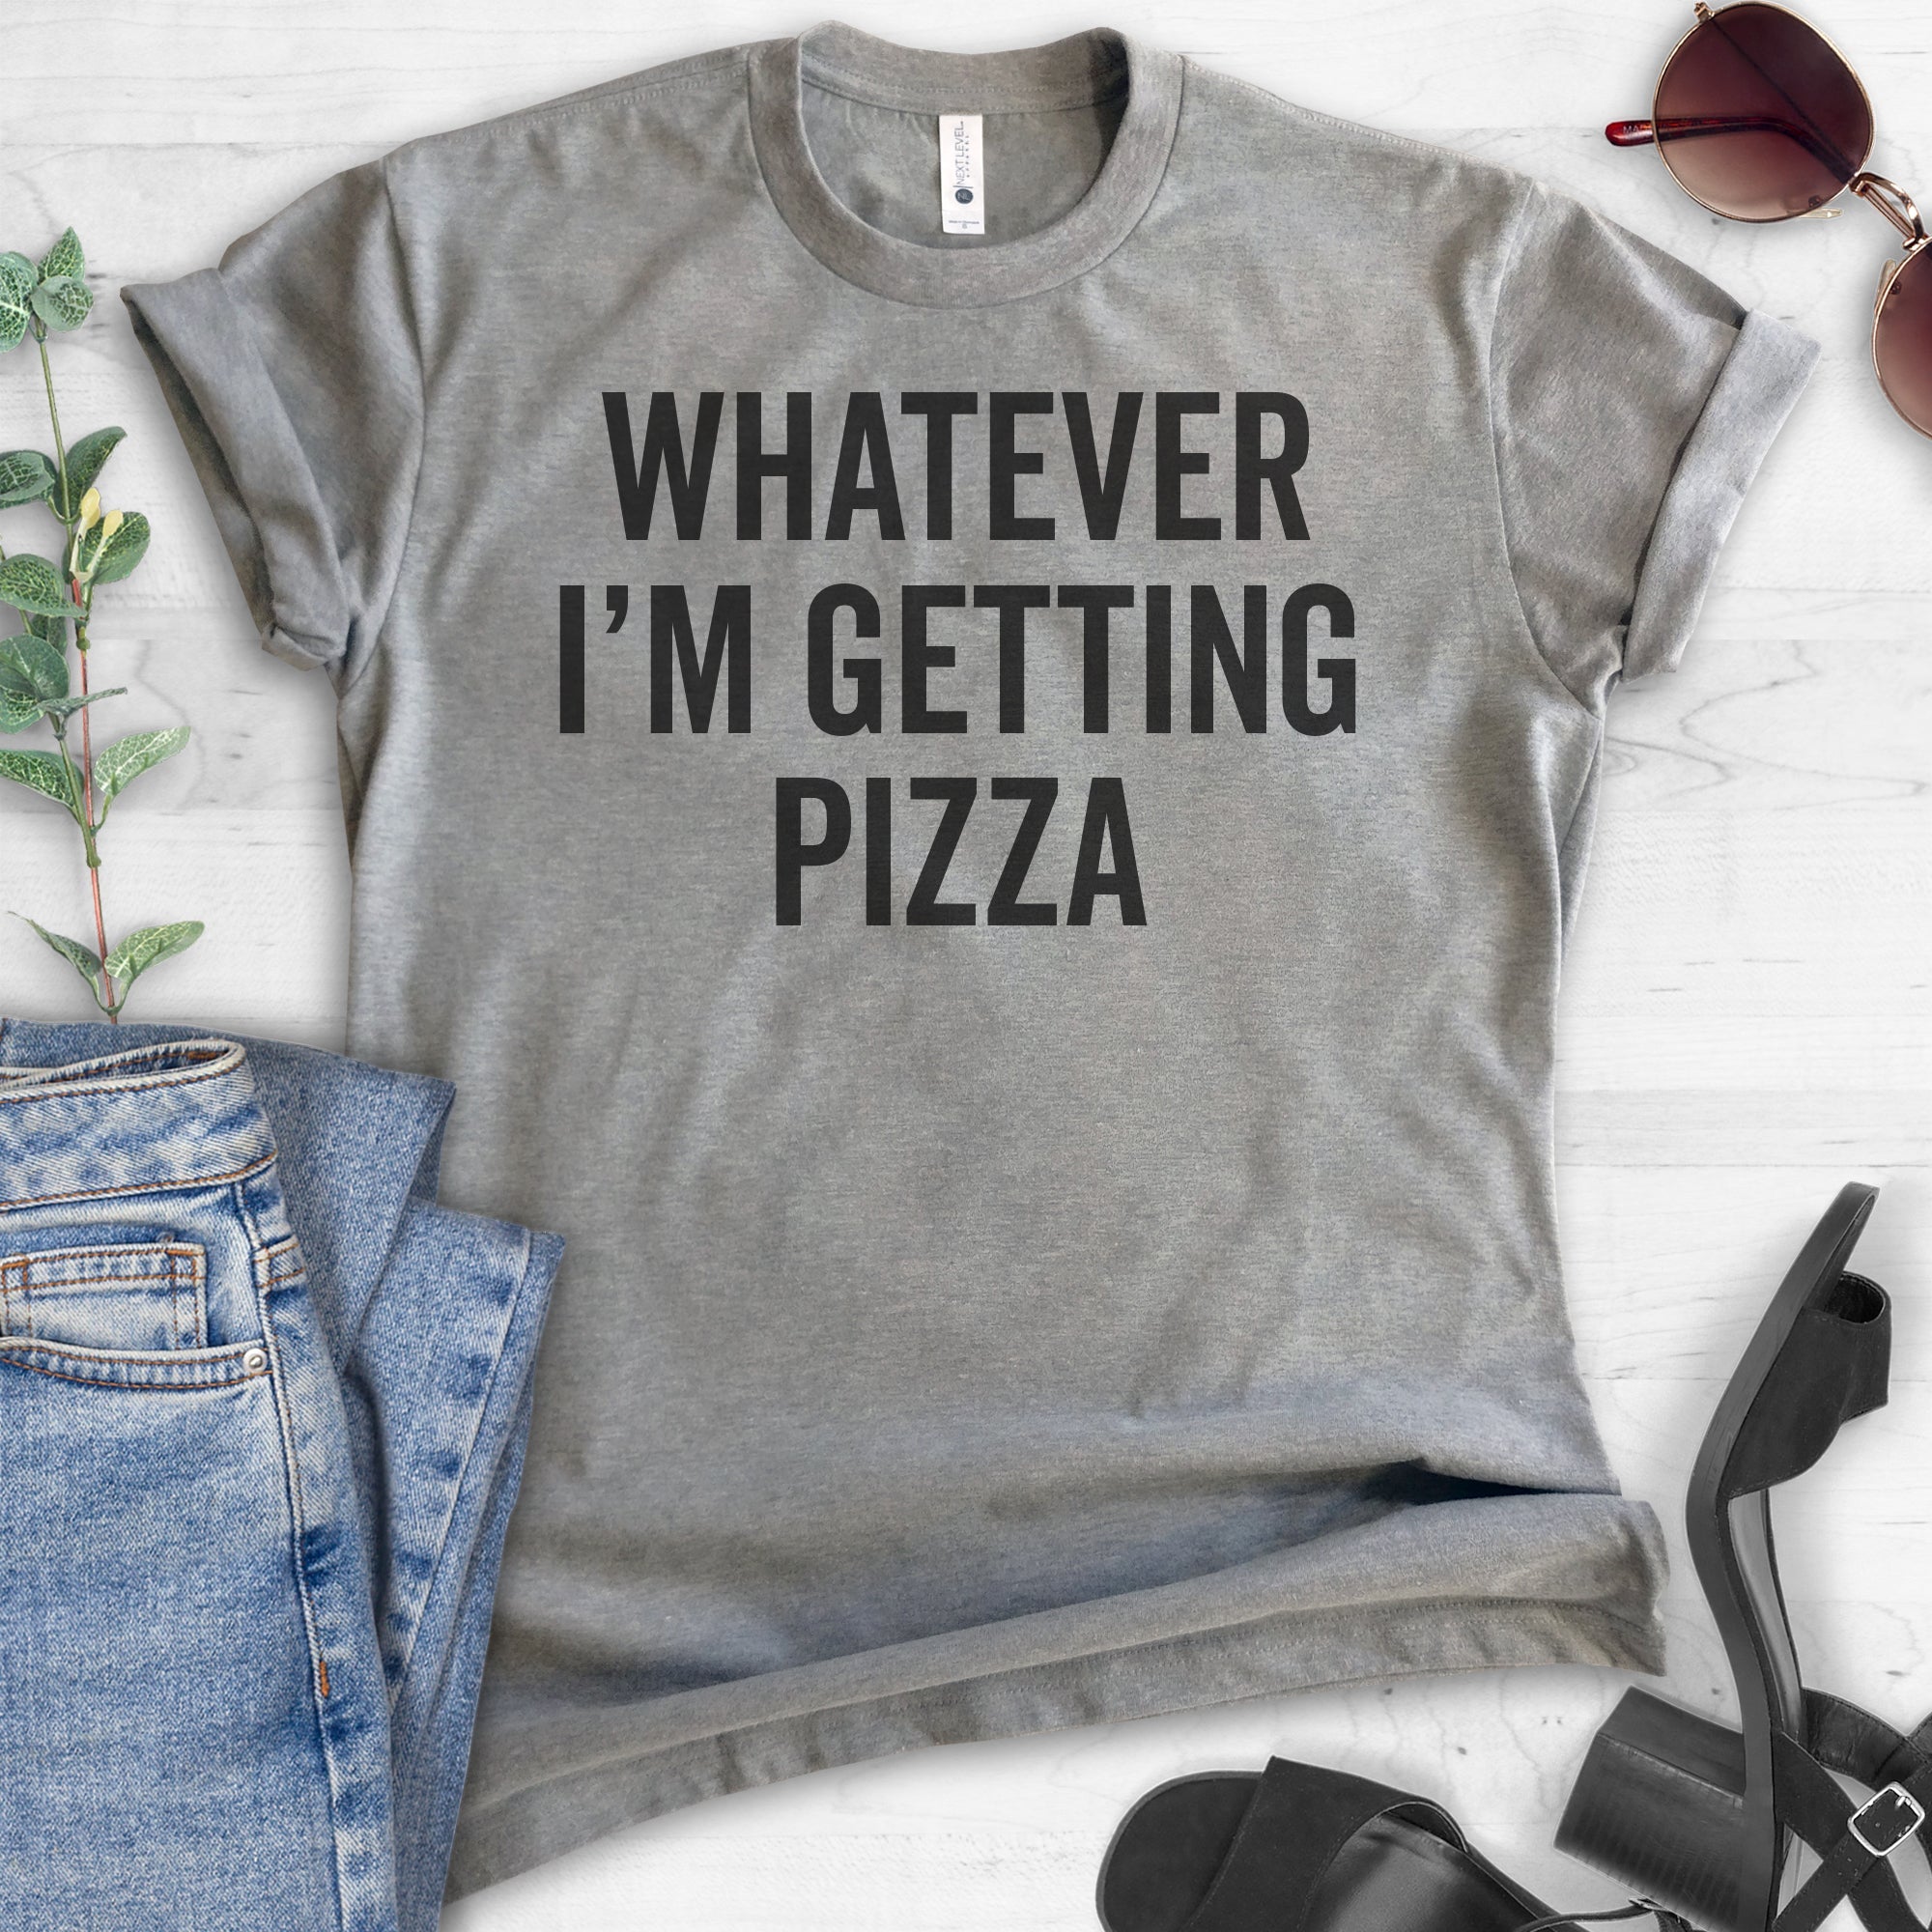 Whatever I'm Getting Pizza T-shirt